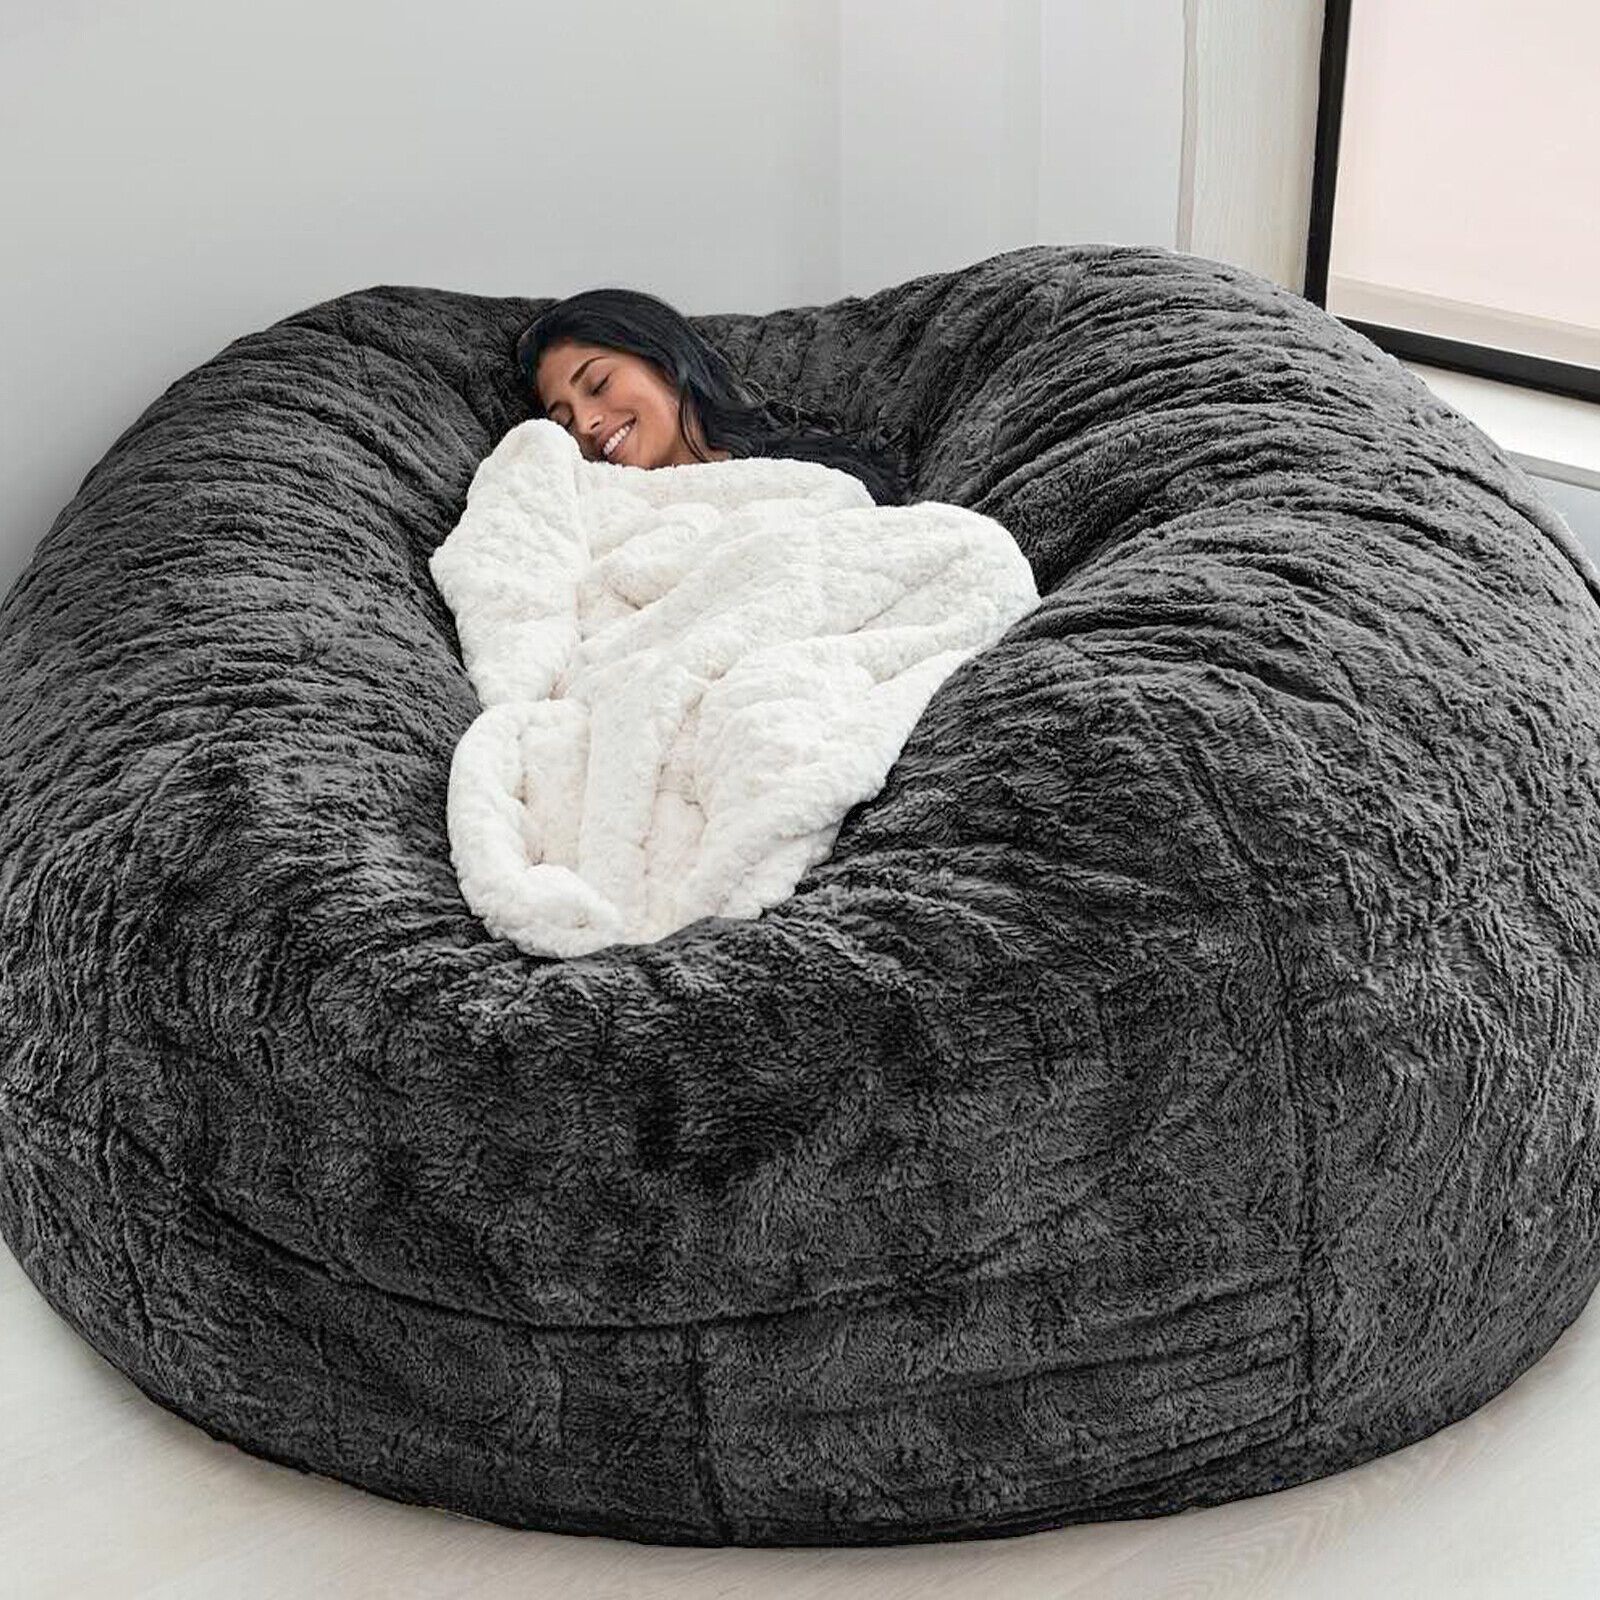 Comfortable Seating: Relax in Style with Bean Bag Chairs